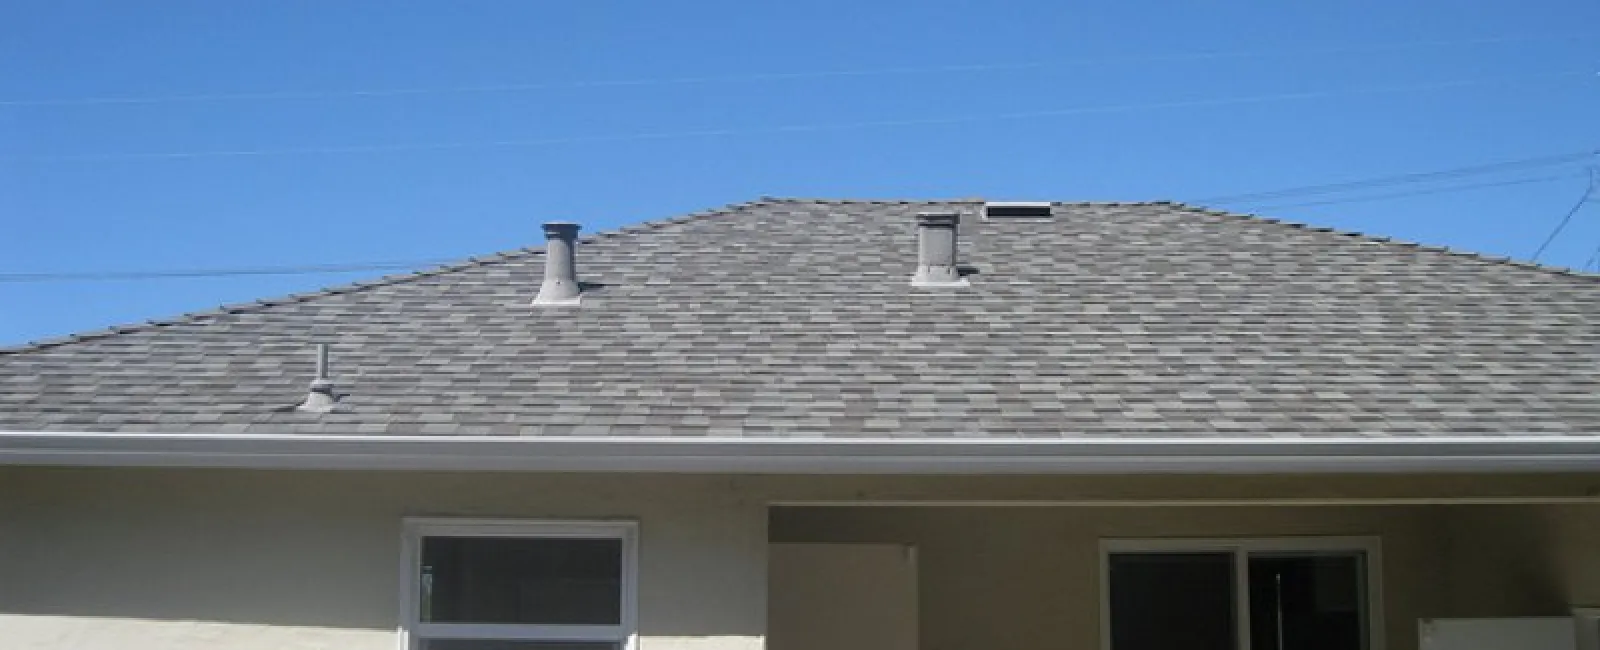 Common Roof Problems to Look For